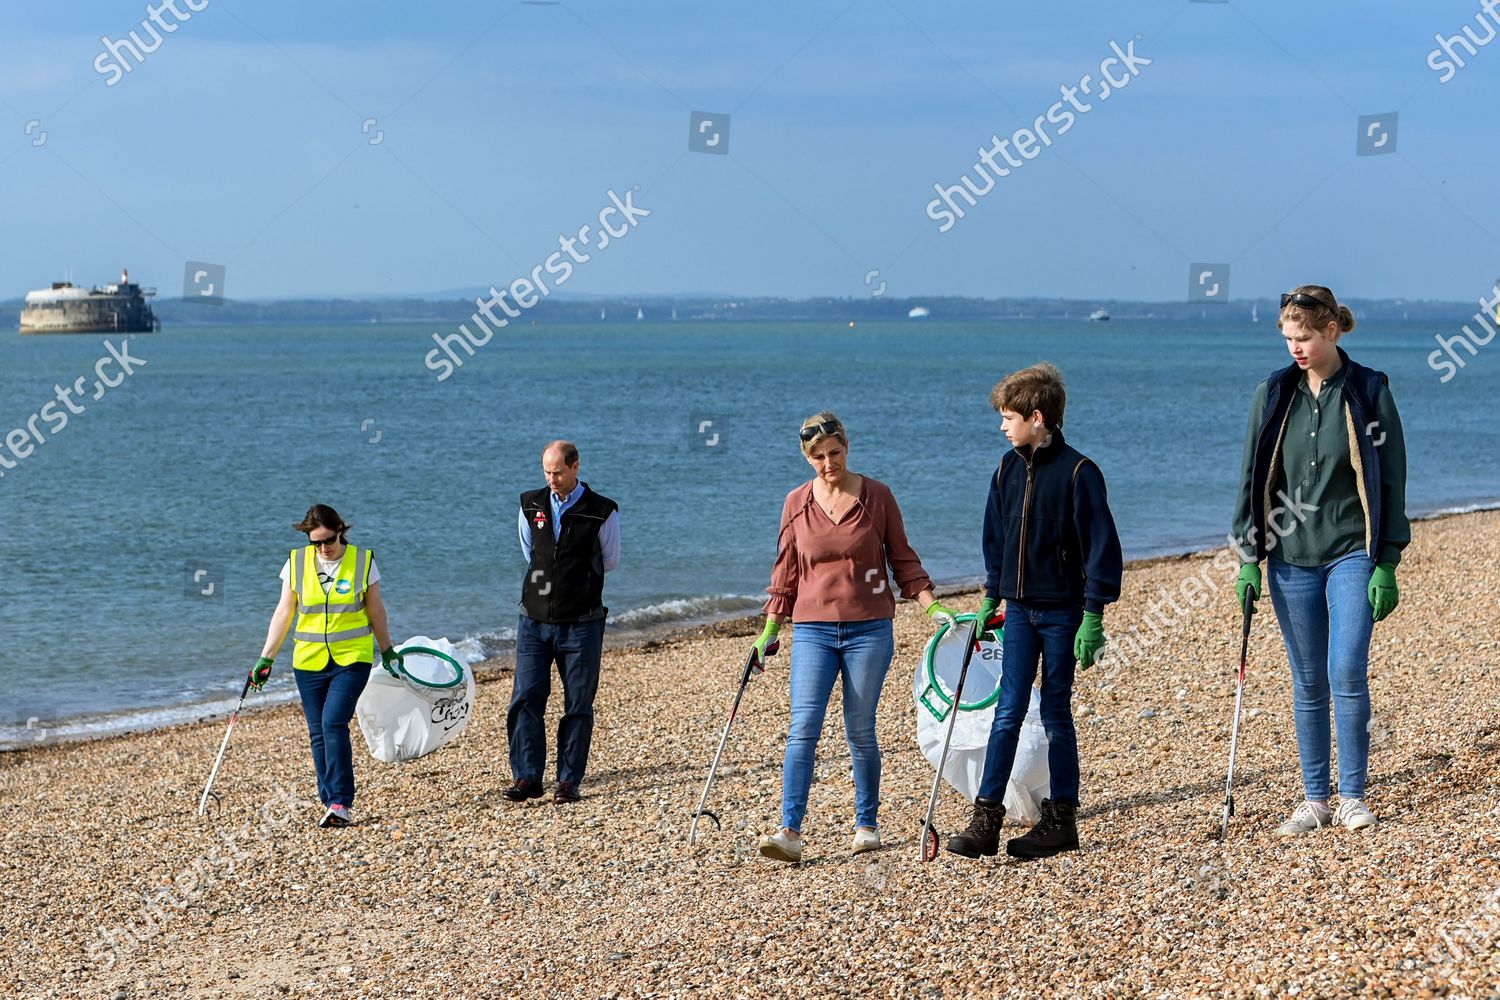 prince-edward-and-sophie-countess-of-wessex-great-british-beach-clean-southsea-beach-portsmouth-uk-shutterstock-editorial-10782998ay.jpg